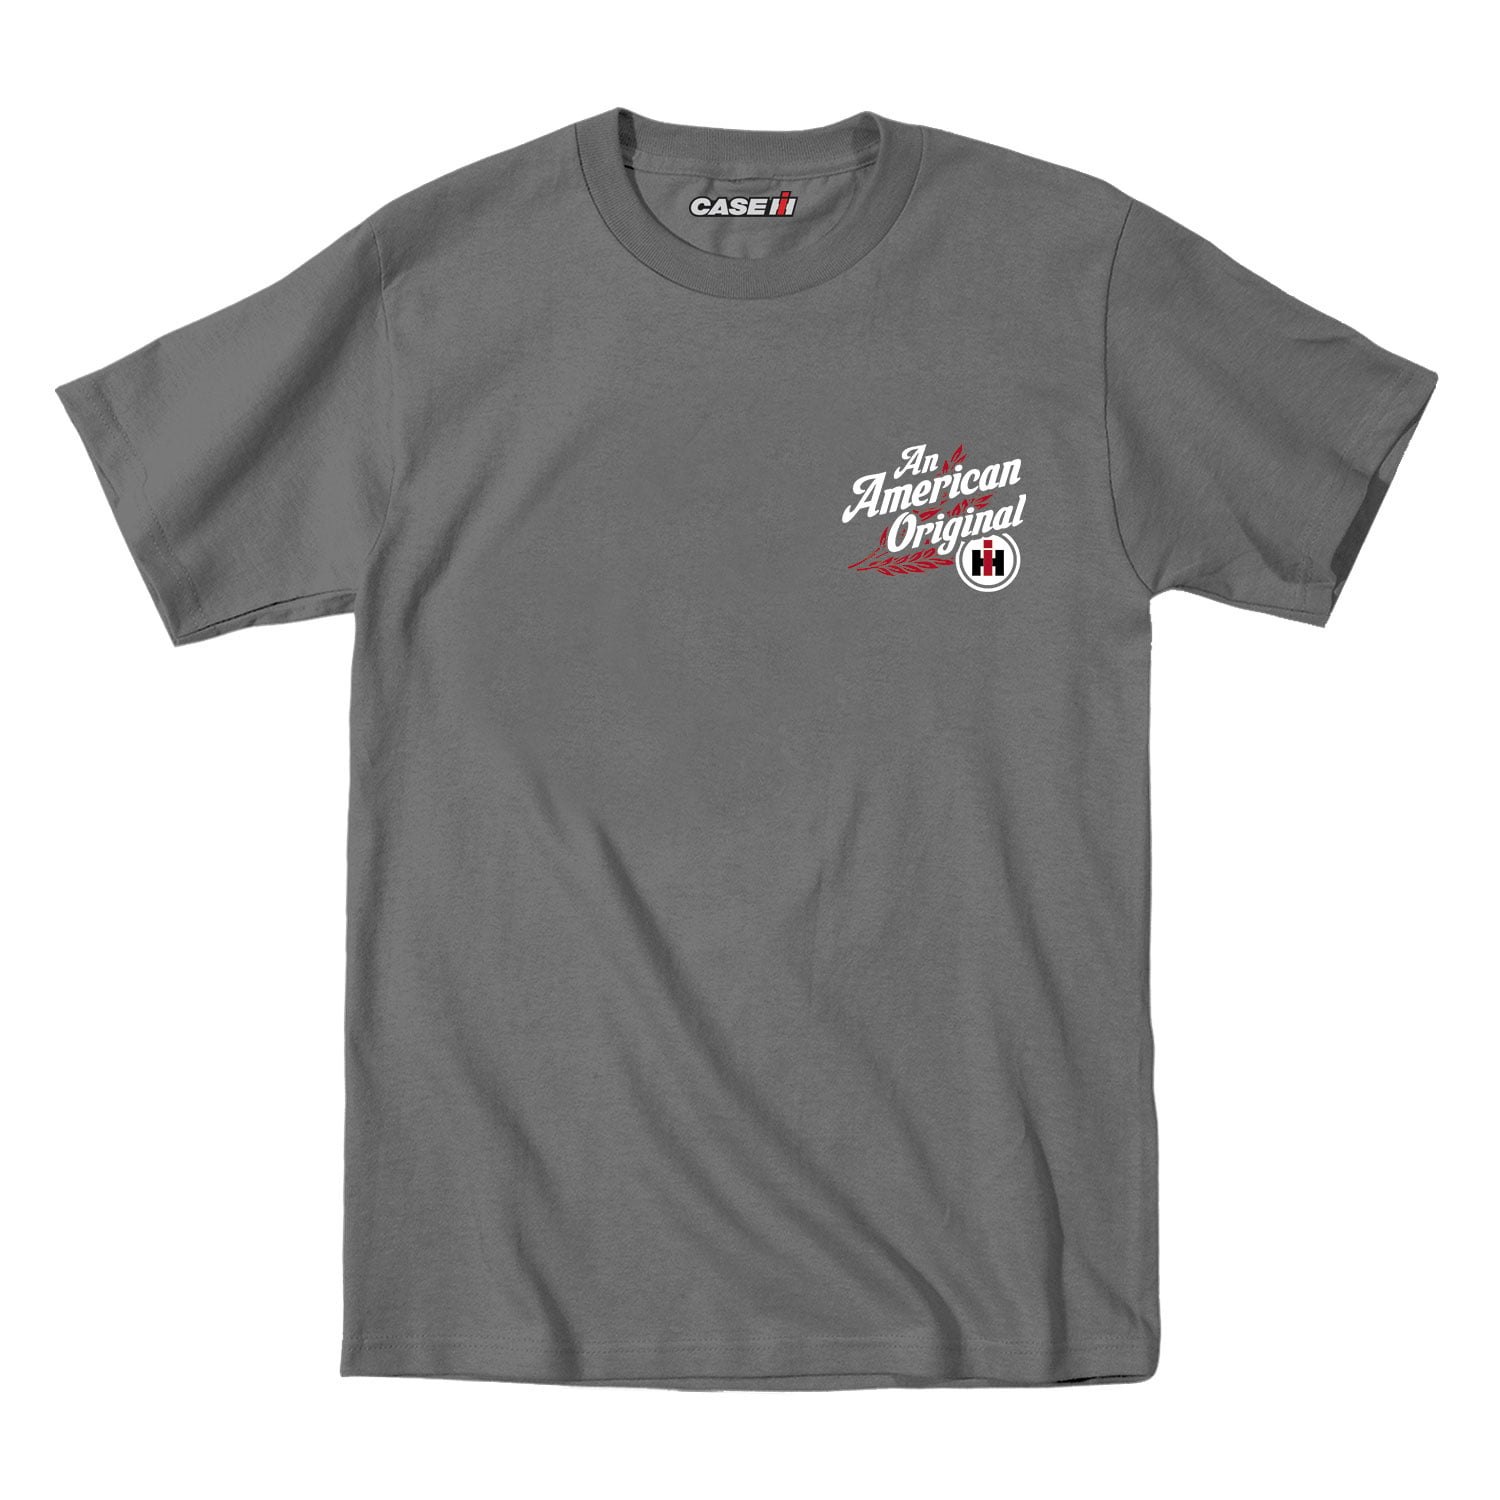 Case IH - IH Proud To Be American - Men's Short Sleeve Graphic T-Shirt ...